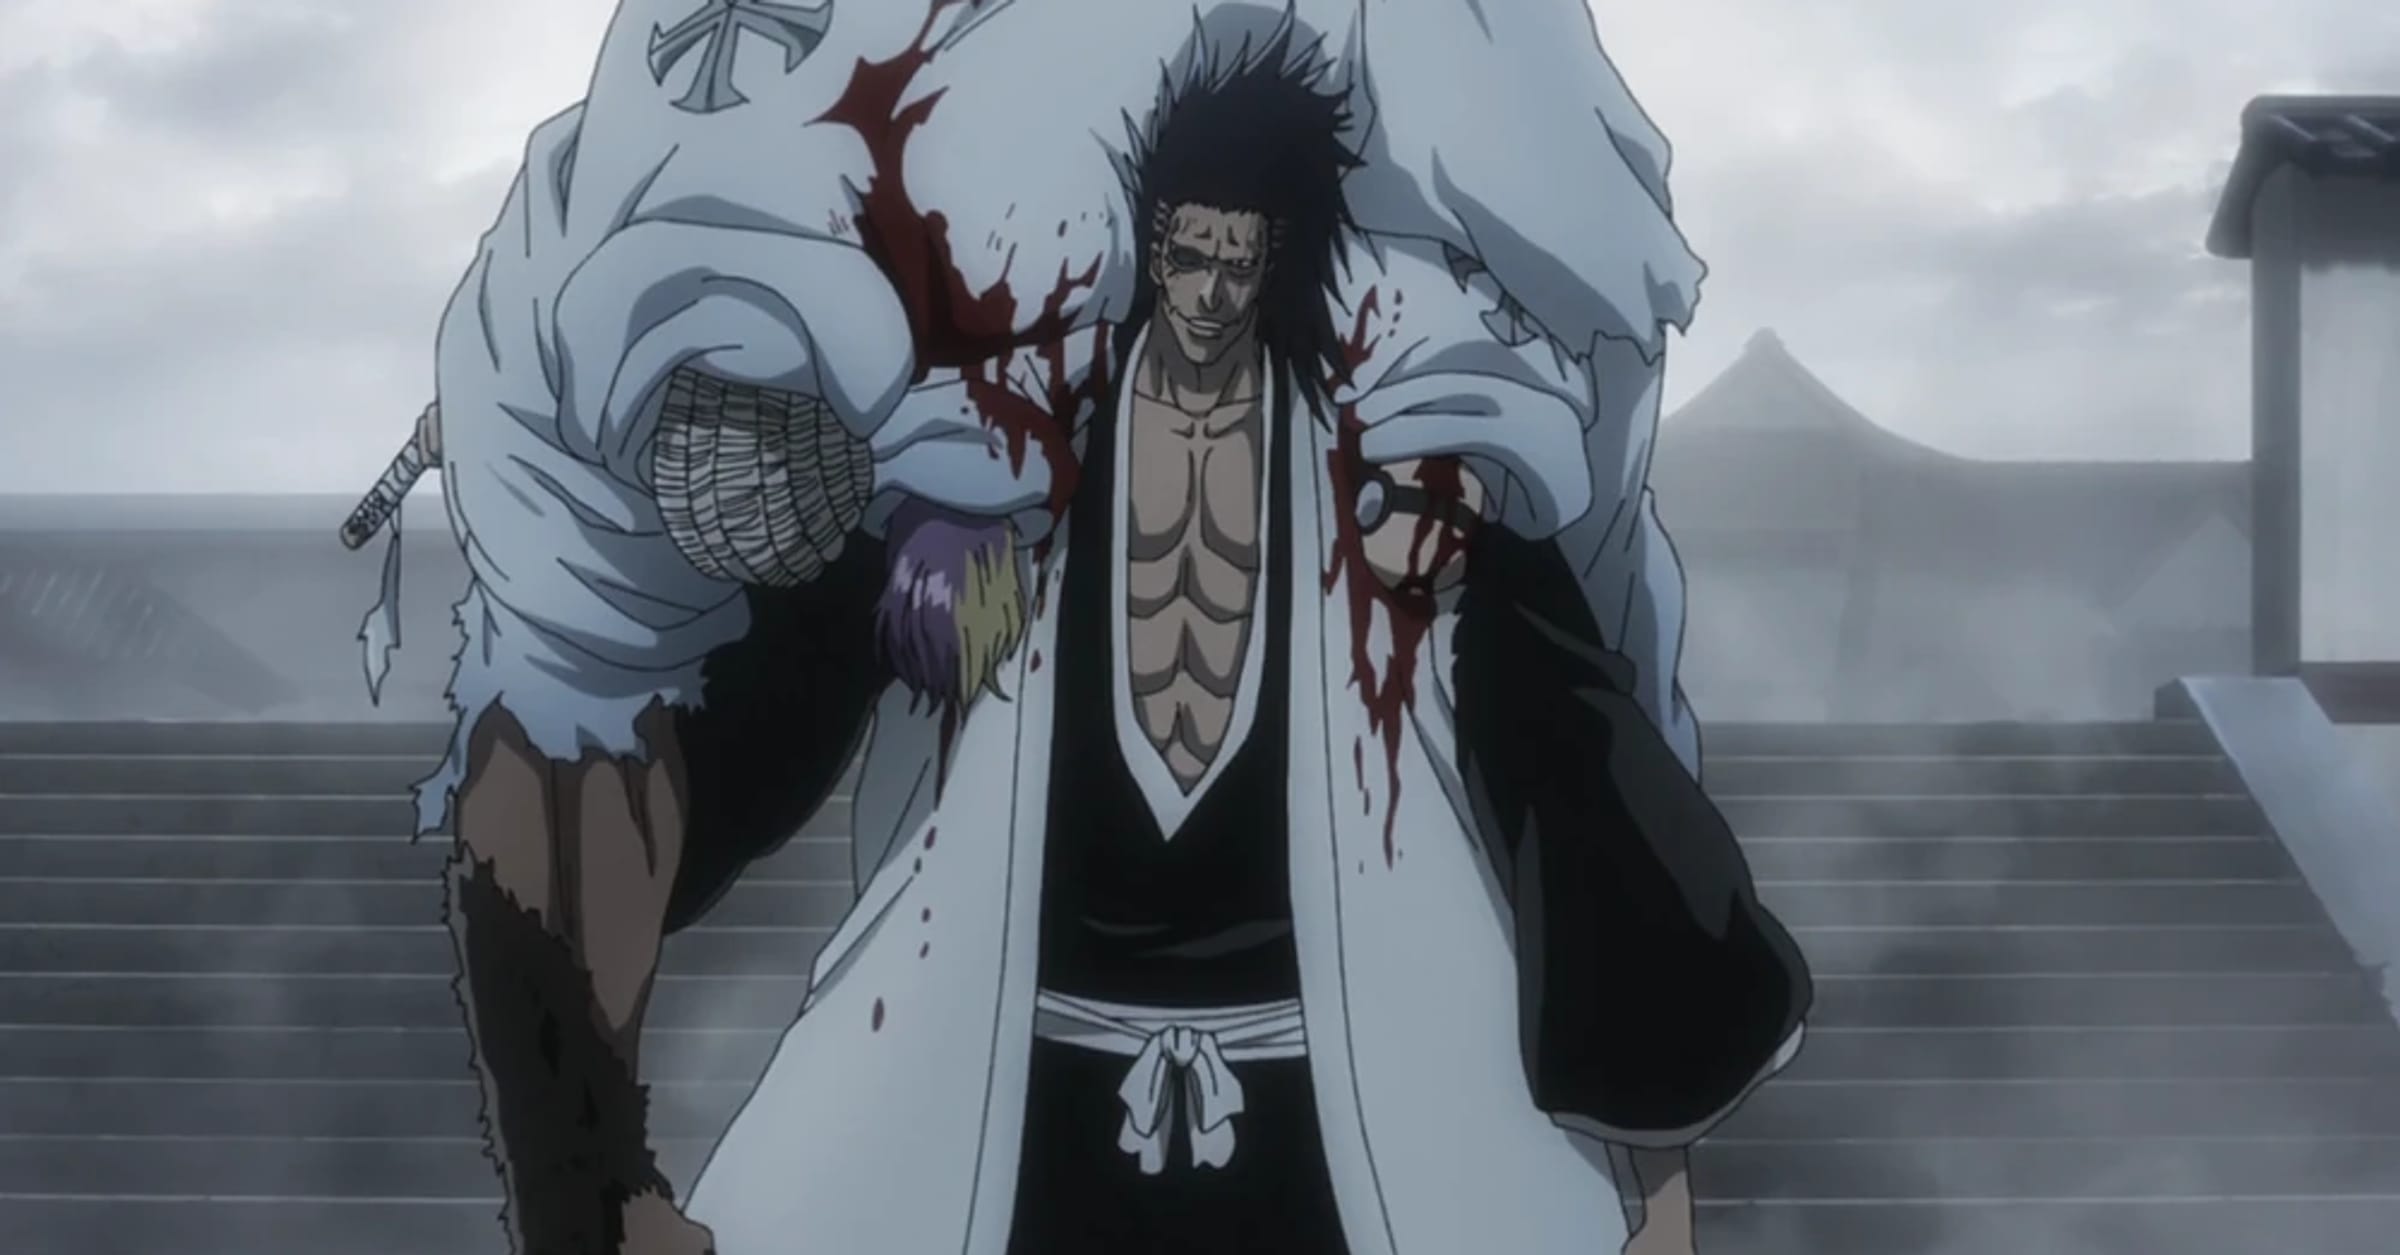 The 15 Strongest 'Bleach' Characters, Ranked